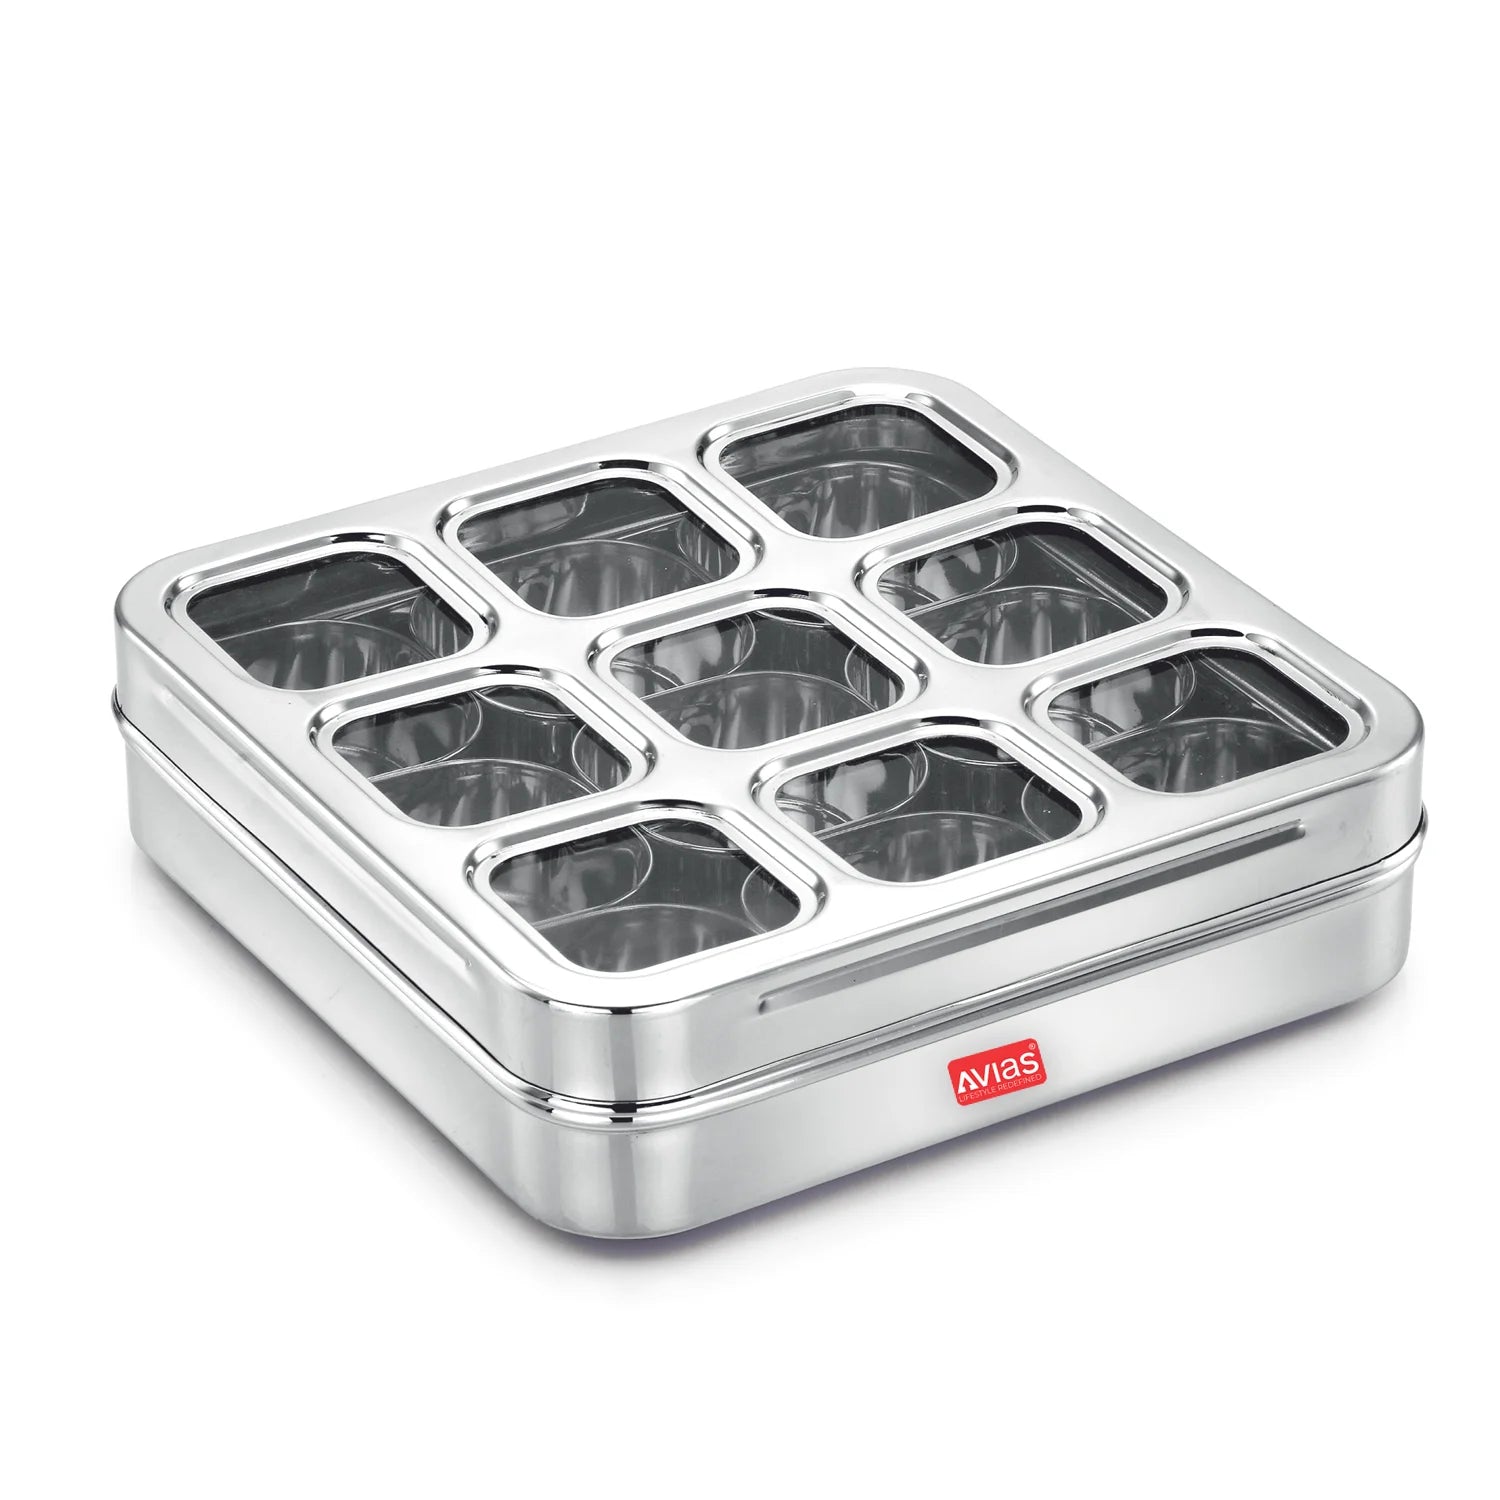 AVIAS stainless steel dry fruit cum spice box with 9 square compartments